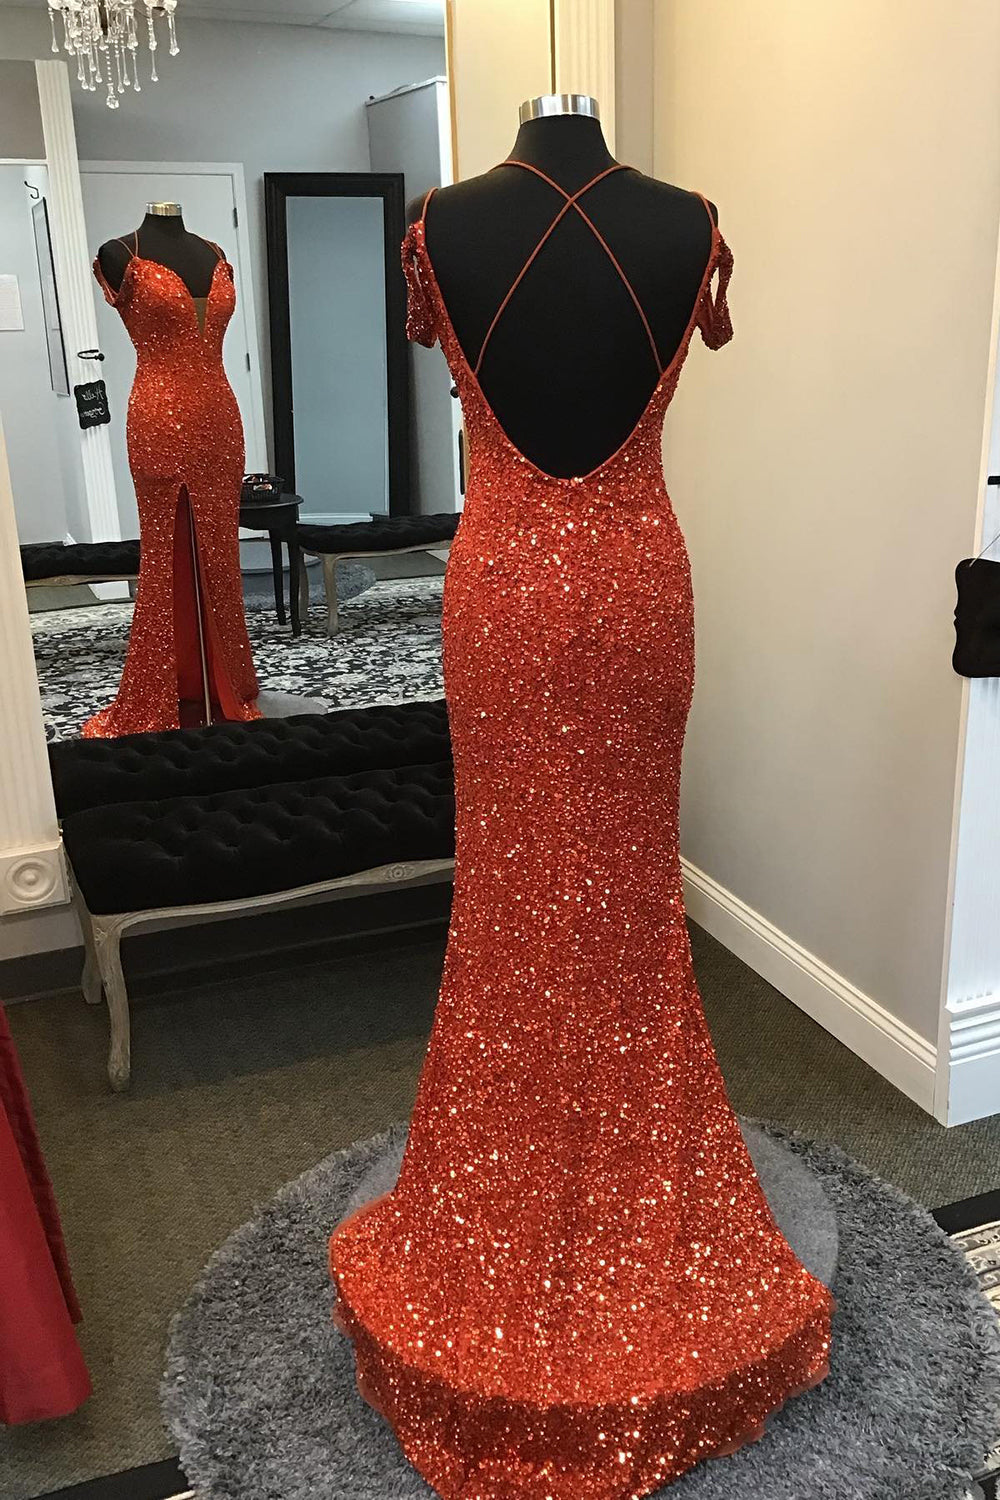 Party Dresses Shop, Orange Sparkly Spaghetti Straps Sequins Long Prom Dress with Slit